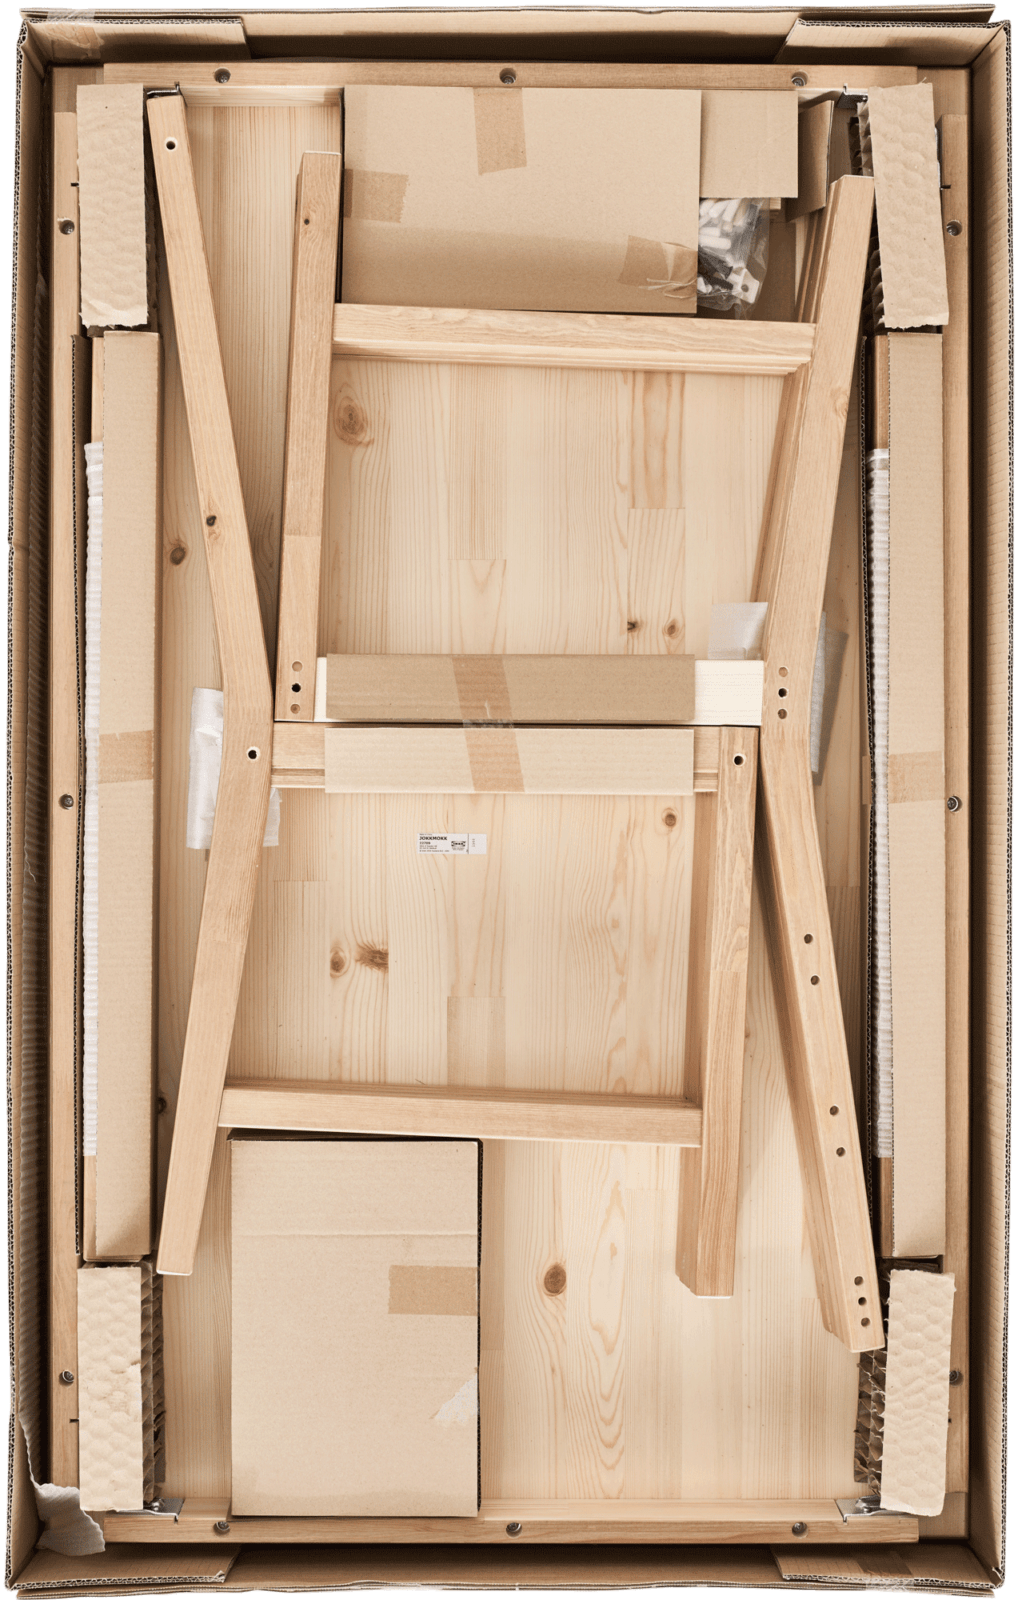 Opened IKEA flat pack seen from above containing the parts for a piece of blond wood furniture.